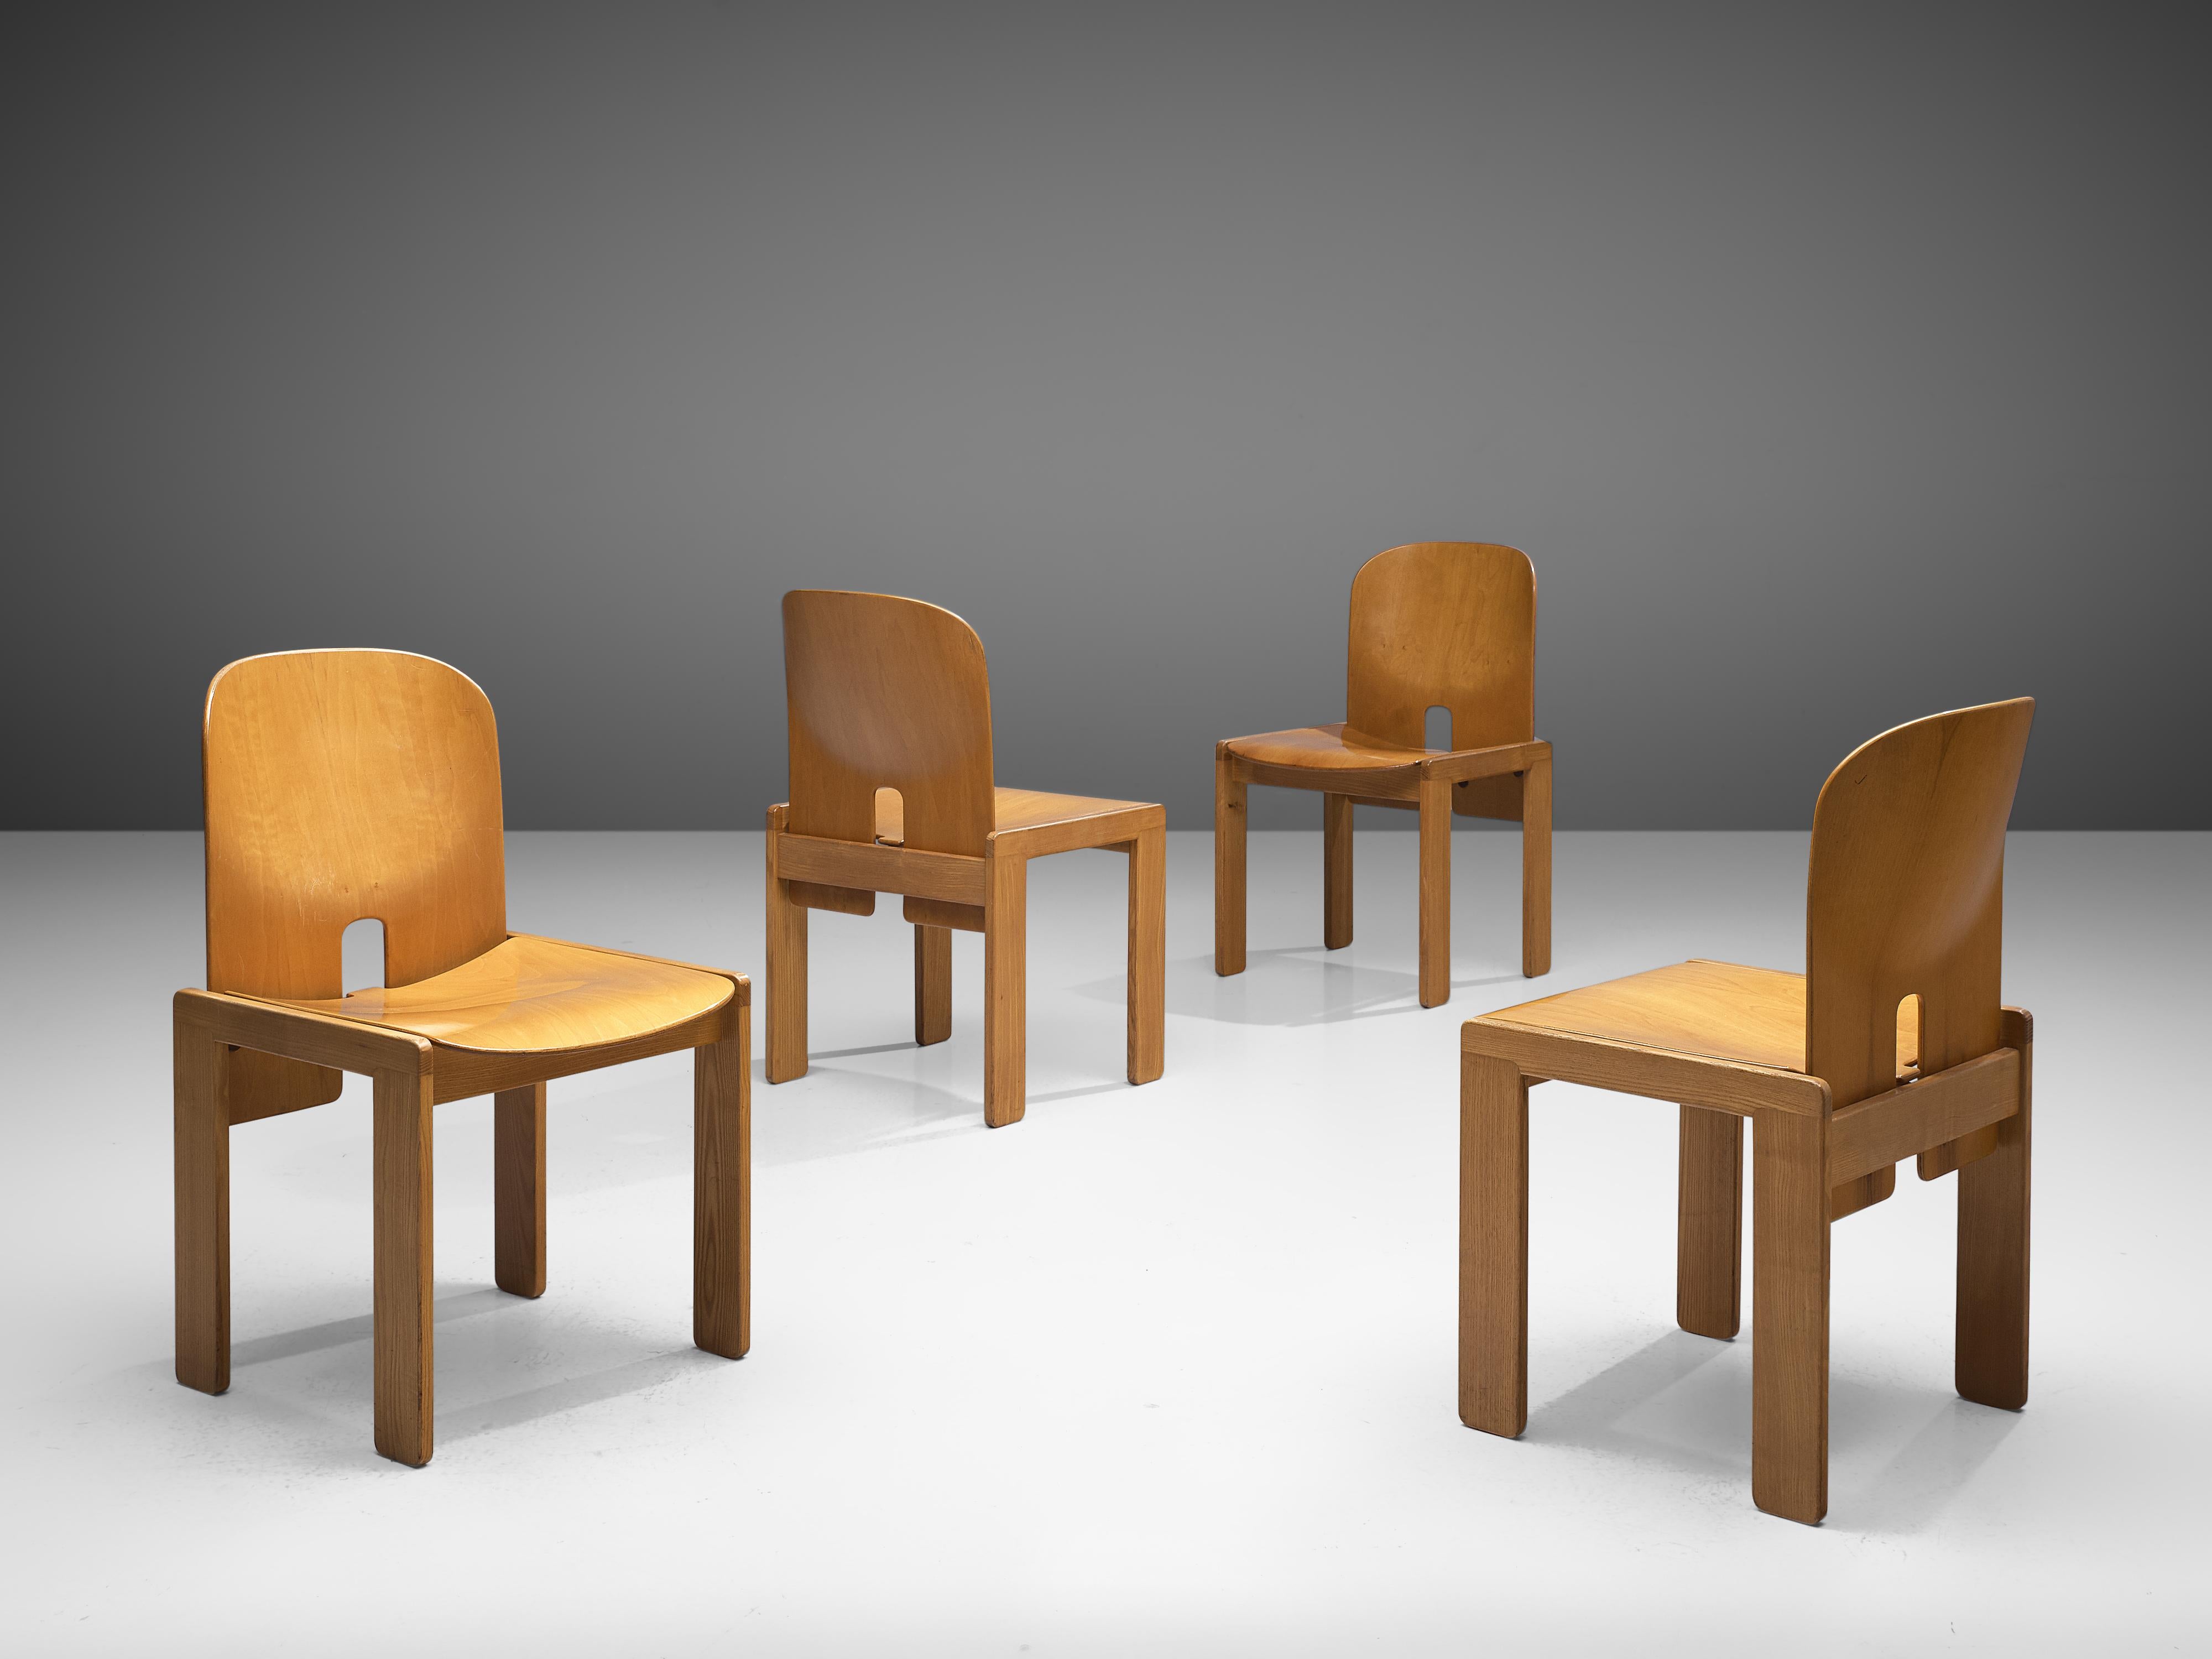 Afra & Tobia Scarpa for Cassina, set of four chairs model 121, maple, ash, Italy, design 1965, production later

Set of four chairs by the Italian designer couple Tobia and Afra Scarpa. These chairs have a cubic and architectural appearance. The